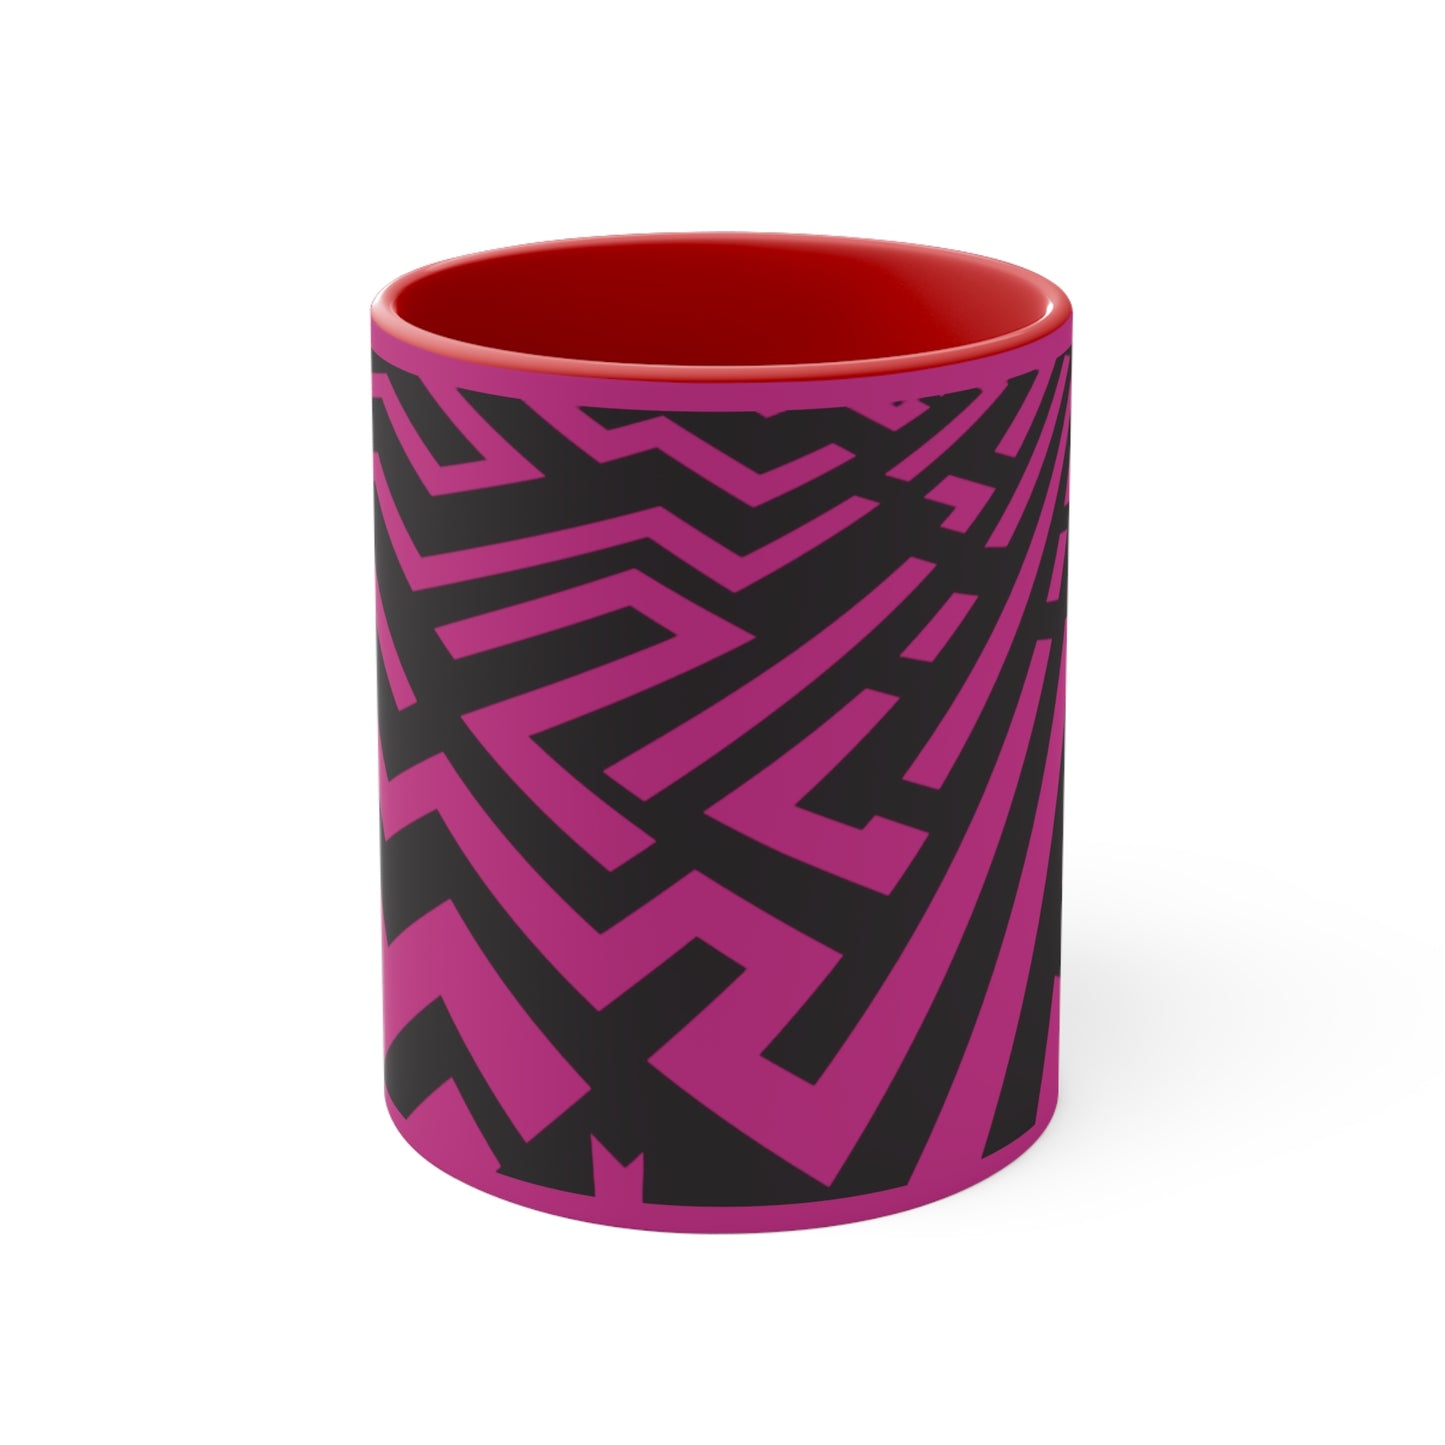 Maze 1 in Pink